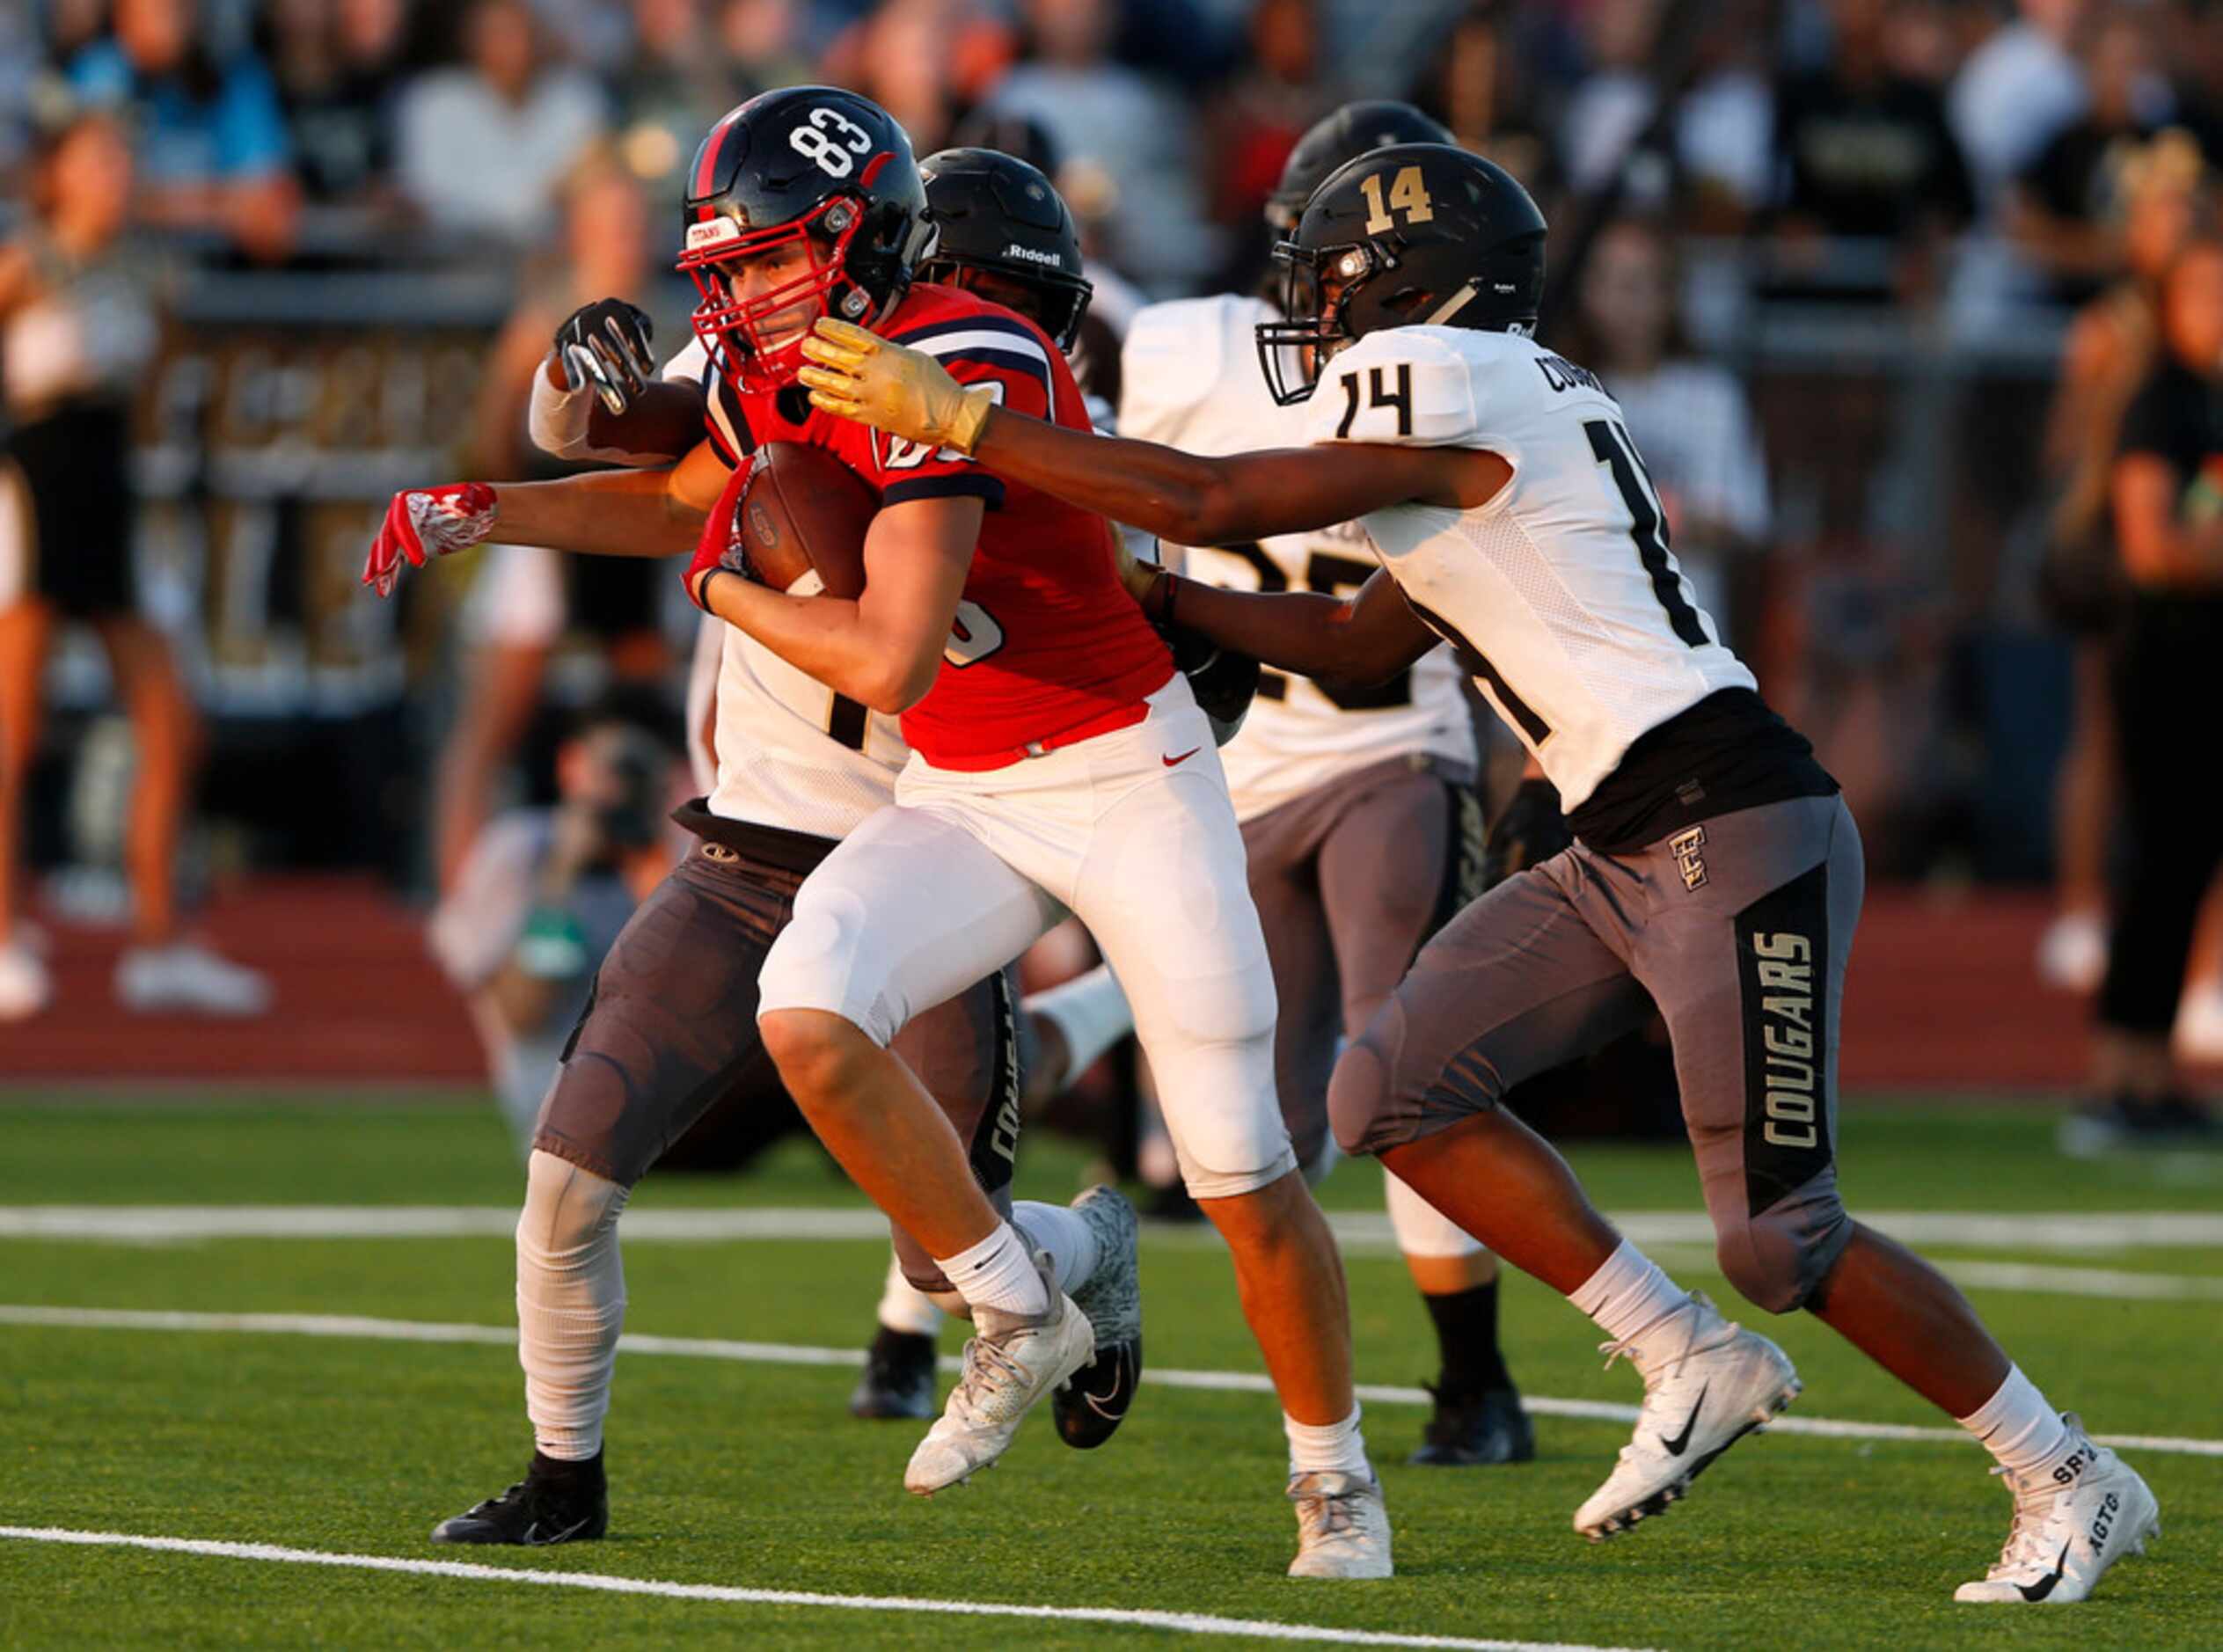 Centennial's Jacob McCoy (83) runs up the field for a touchdown as The Colony's Stephen...